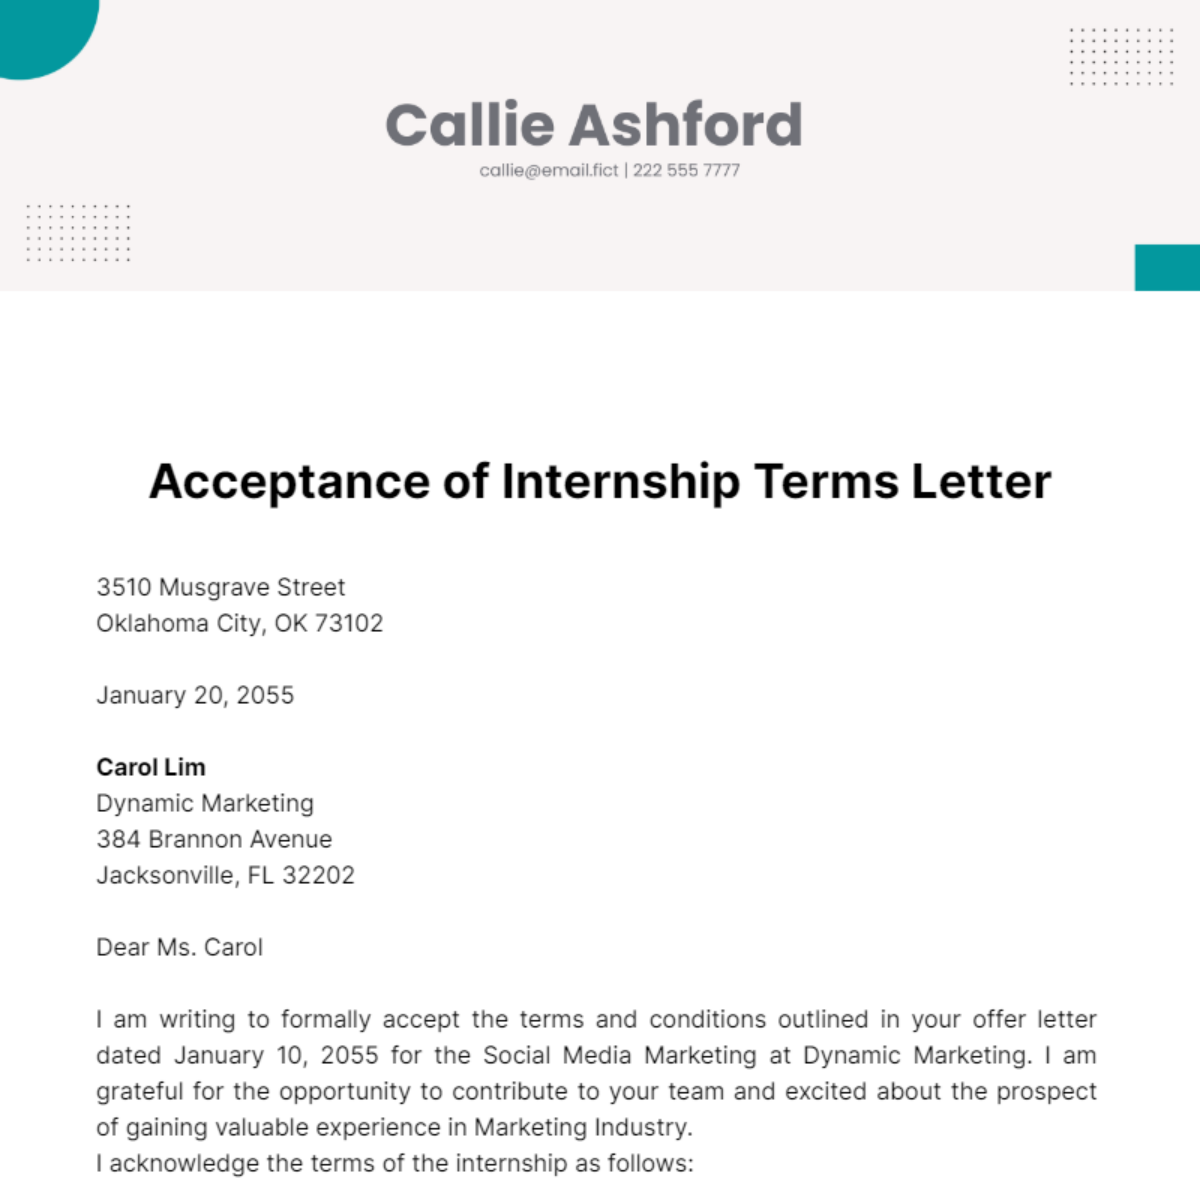 Acceptance of Internship Terms Letter Template